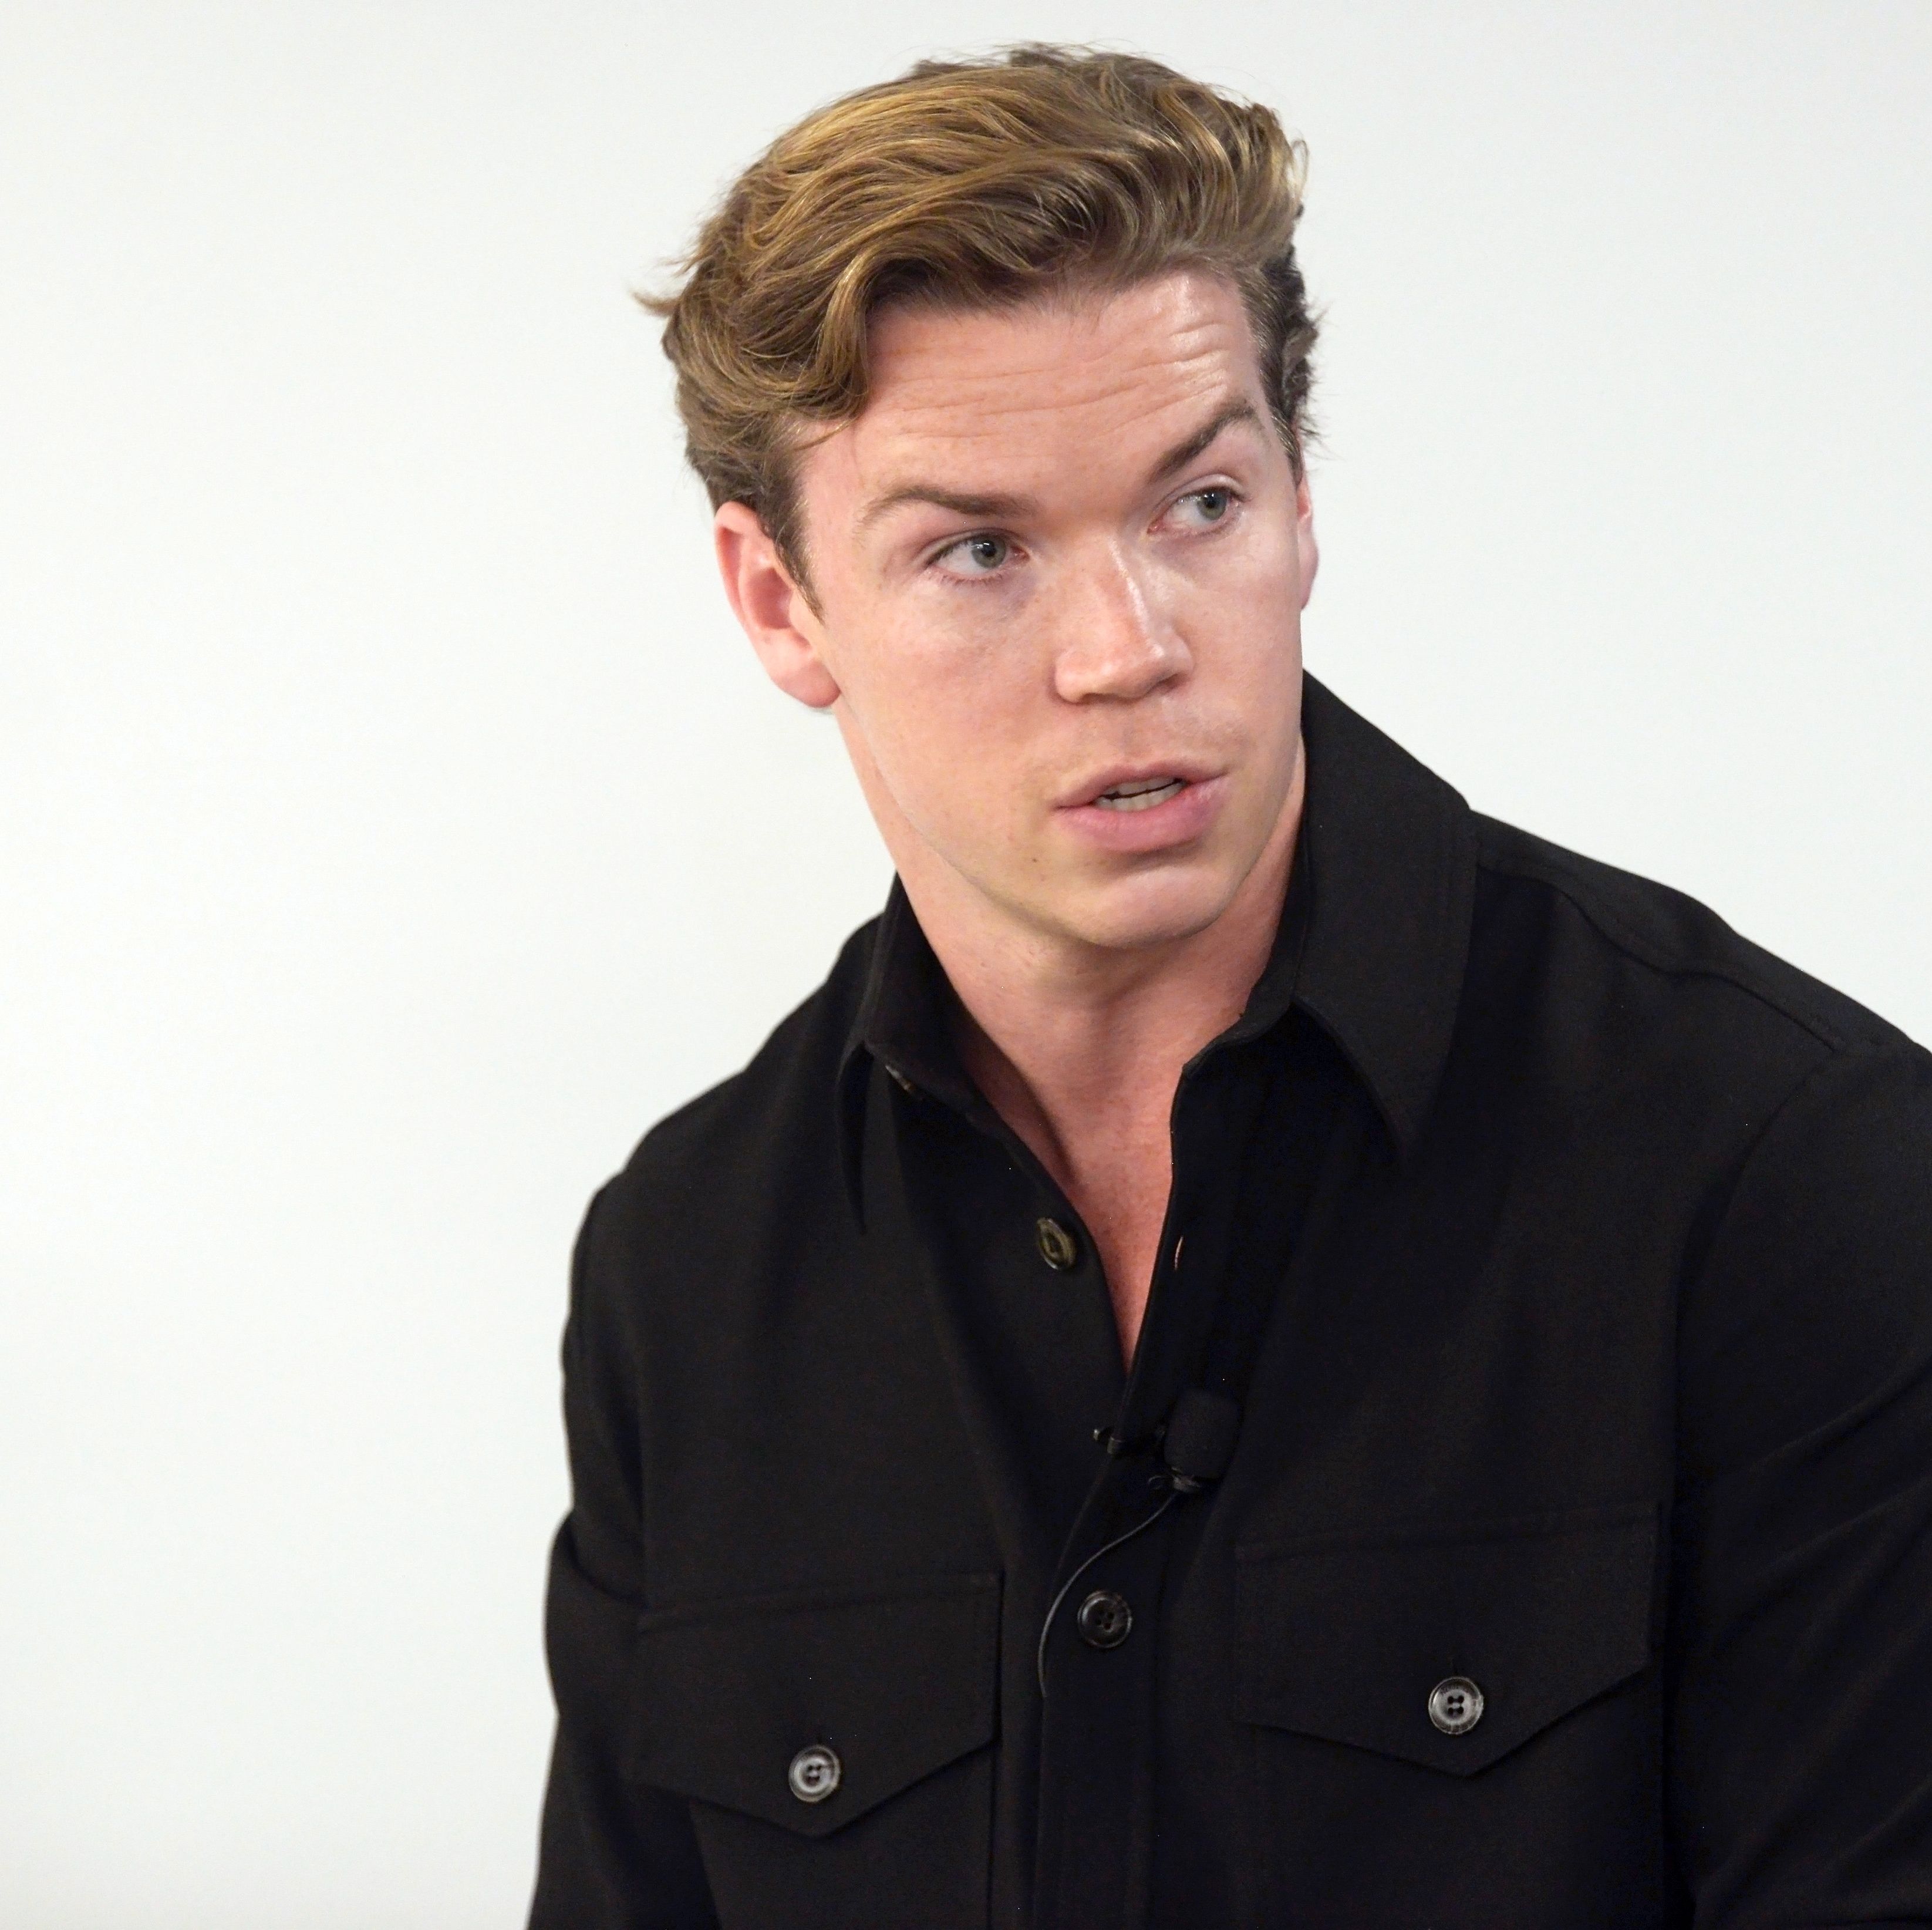 Marvel Star Will Poulter Calls Superhero Body Transformations 'Unhealthy' and 'Unrealistic'